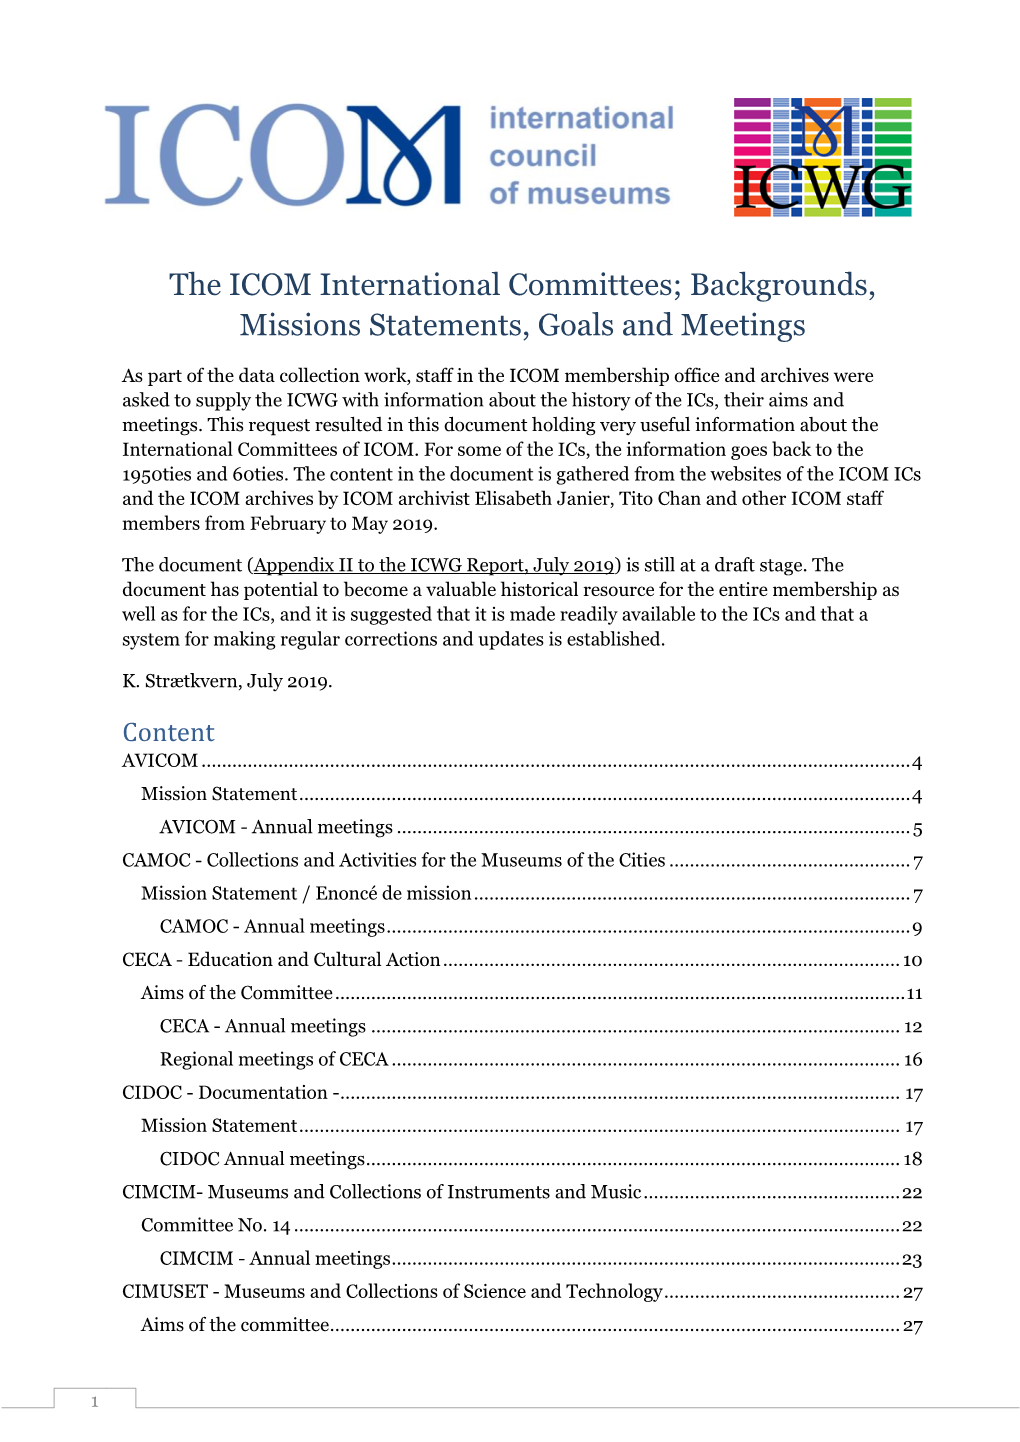 The ICOM International Committees; Backgrounds, Missions Statements, Goals and Meetings